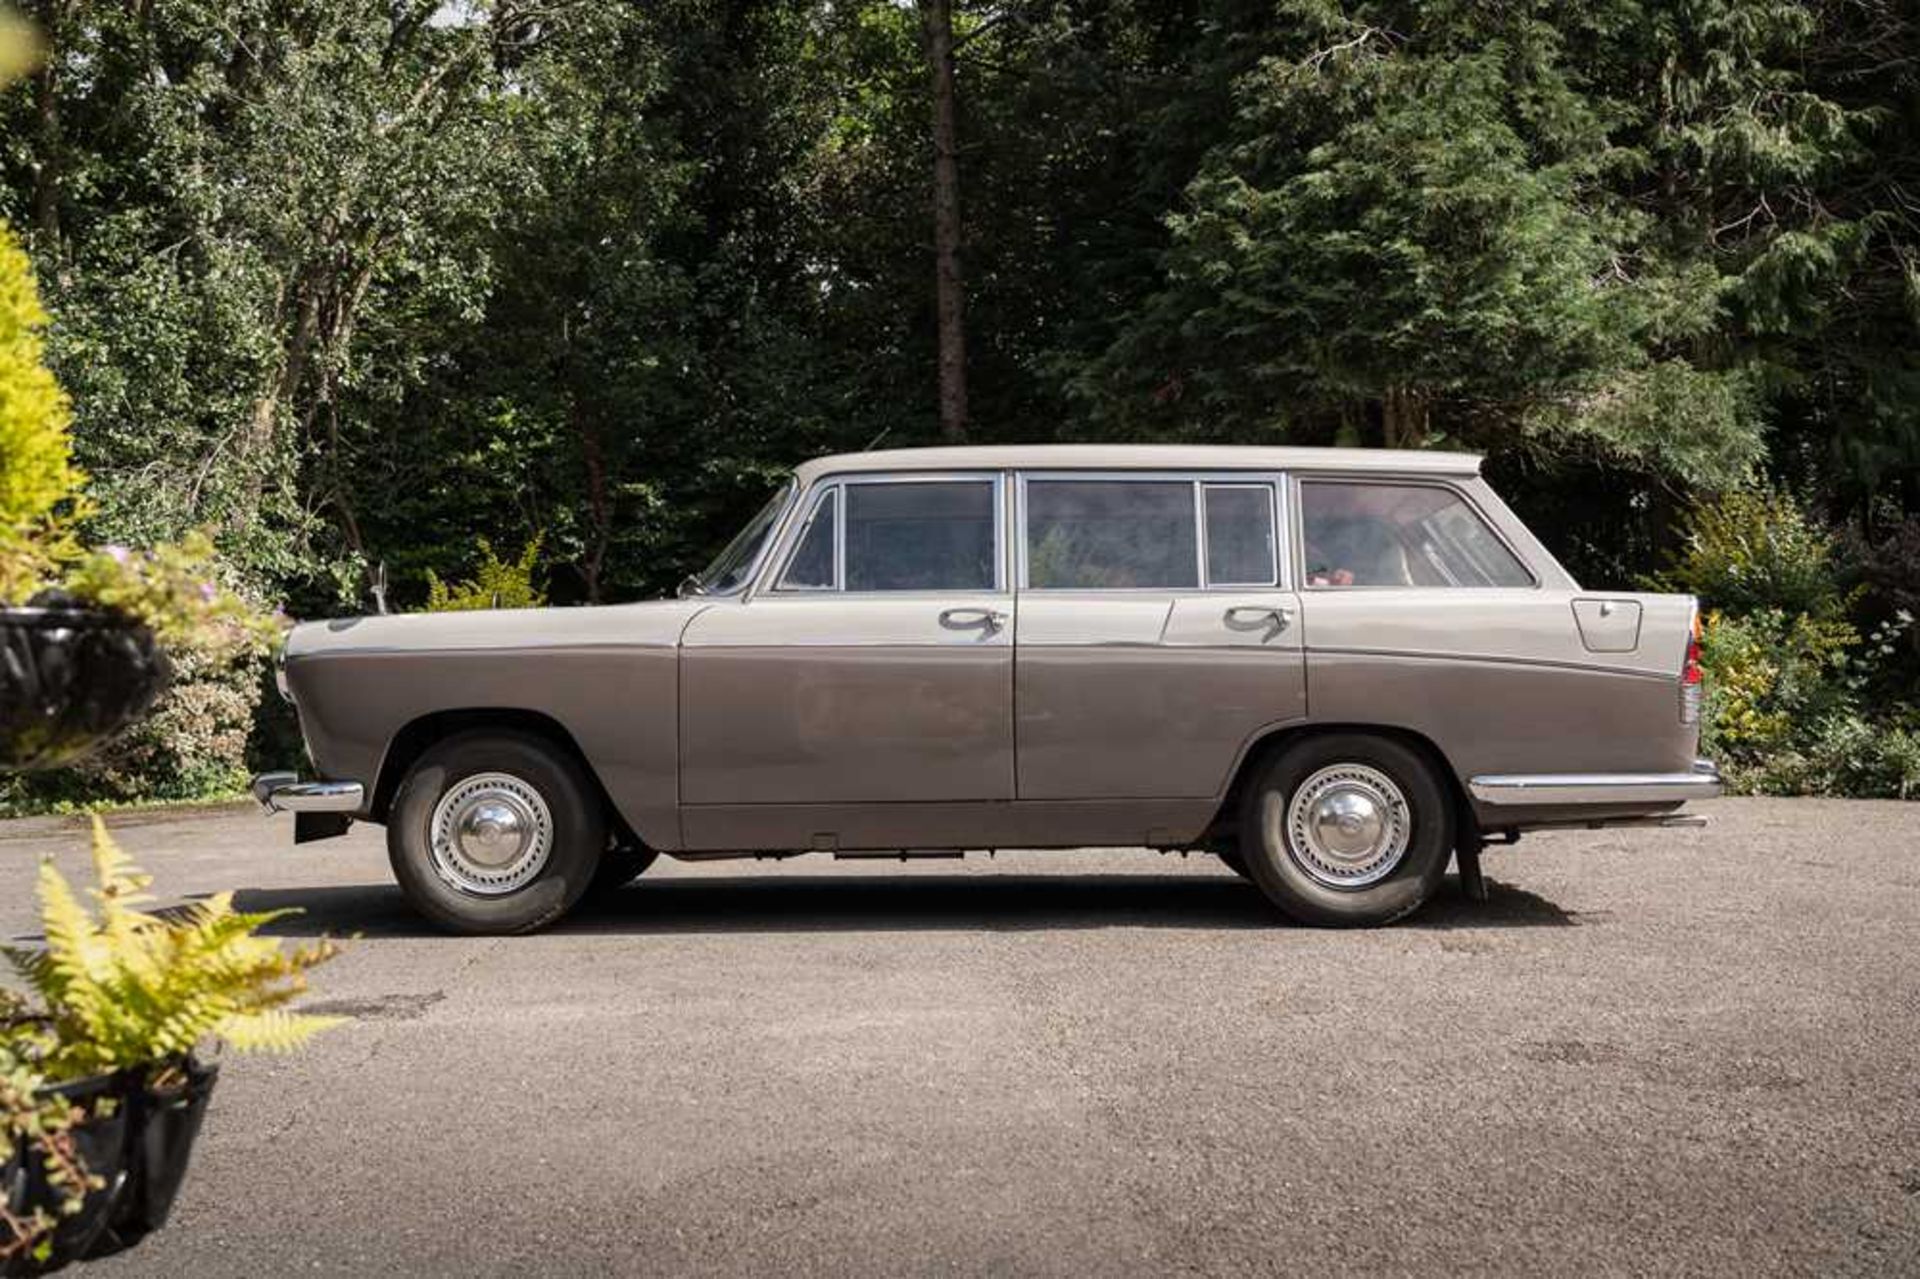 1964 Morris Oxford Series VI Farina Traveller Just 7,000 miles from new - Image 9 of 98